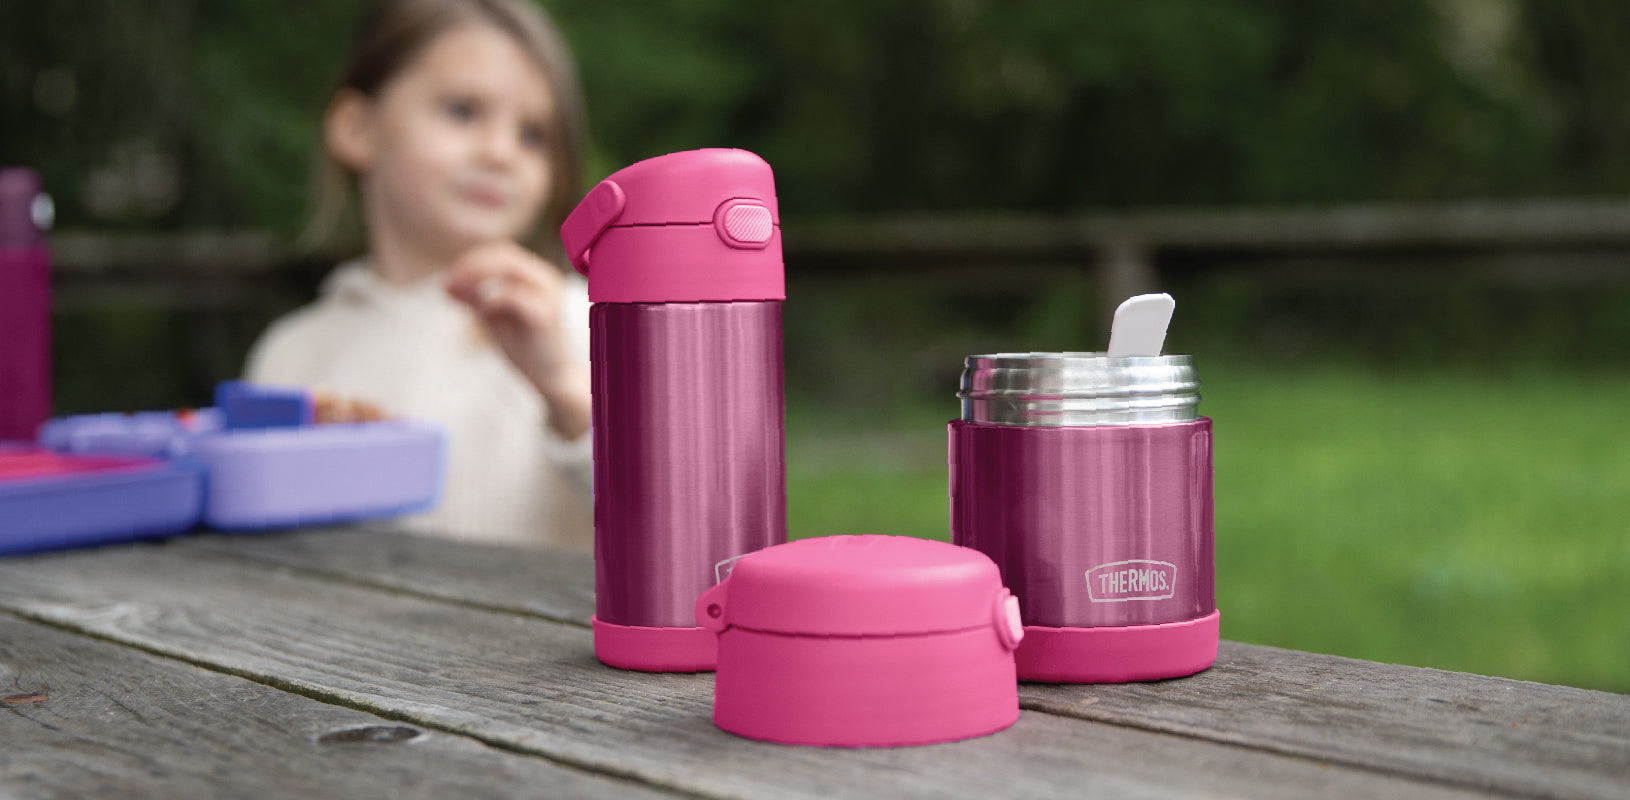 http://thermos.com/cdn/shop/collections/plp_kid_foodstorage_1620x600_1024x1024_1024x1024_a26486e7-7995-42ee-aac8-f7a4686469a5.jpg?v=1695156909